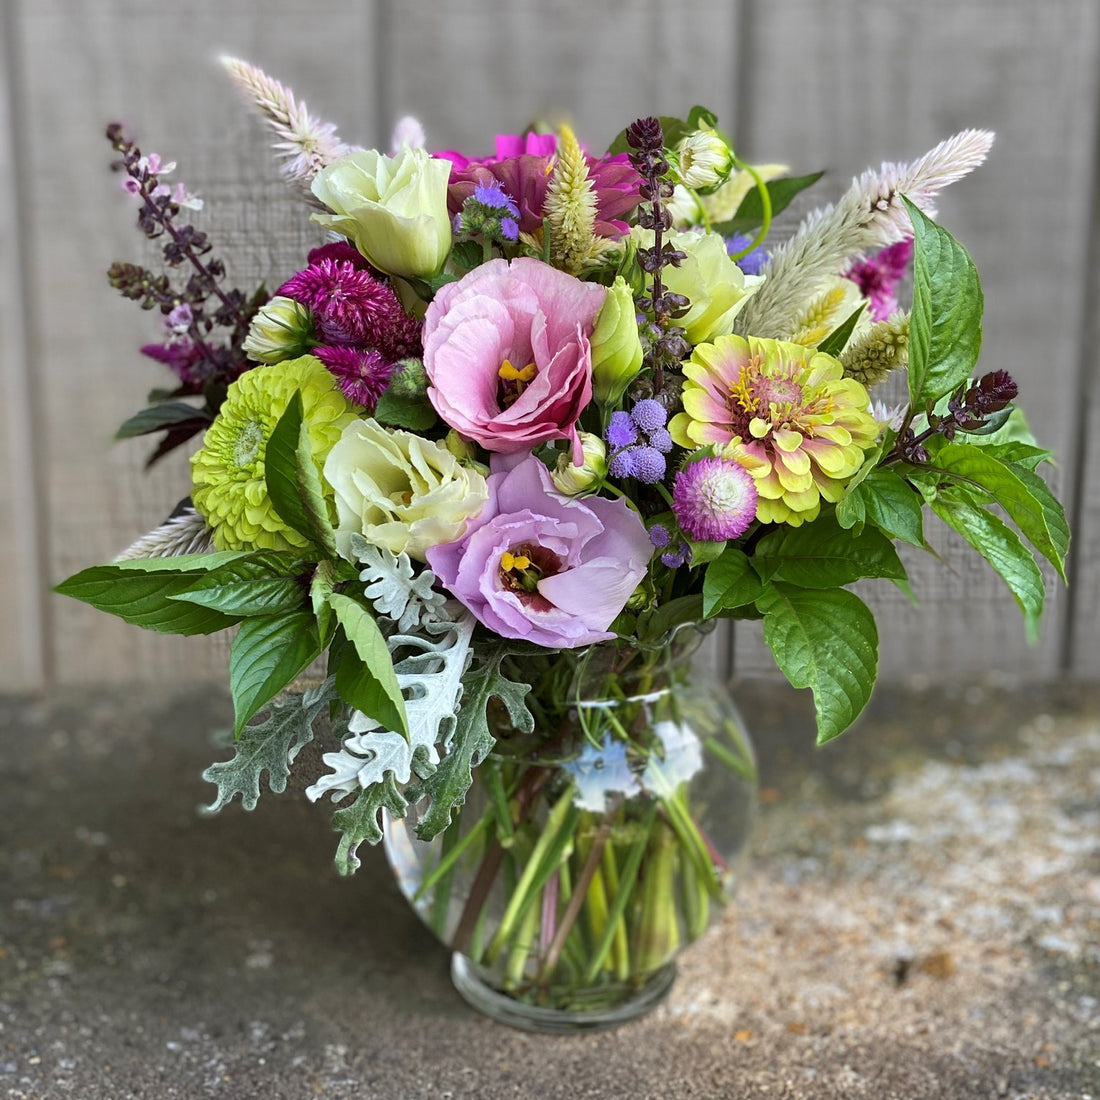 How to Build a Small Seasonal Bouquet